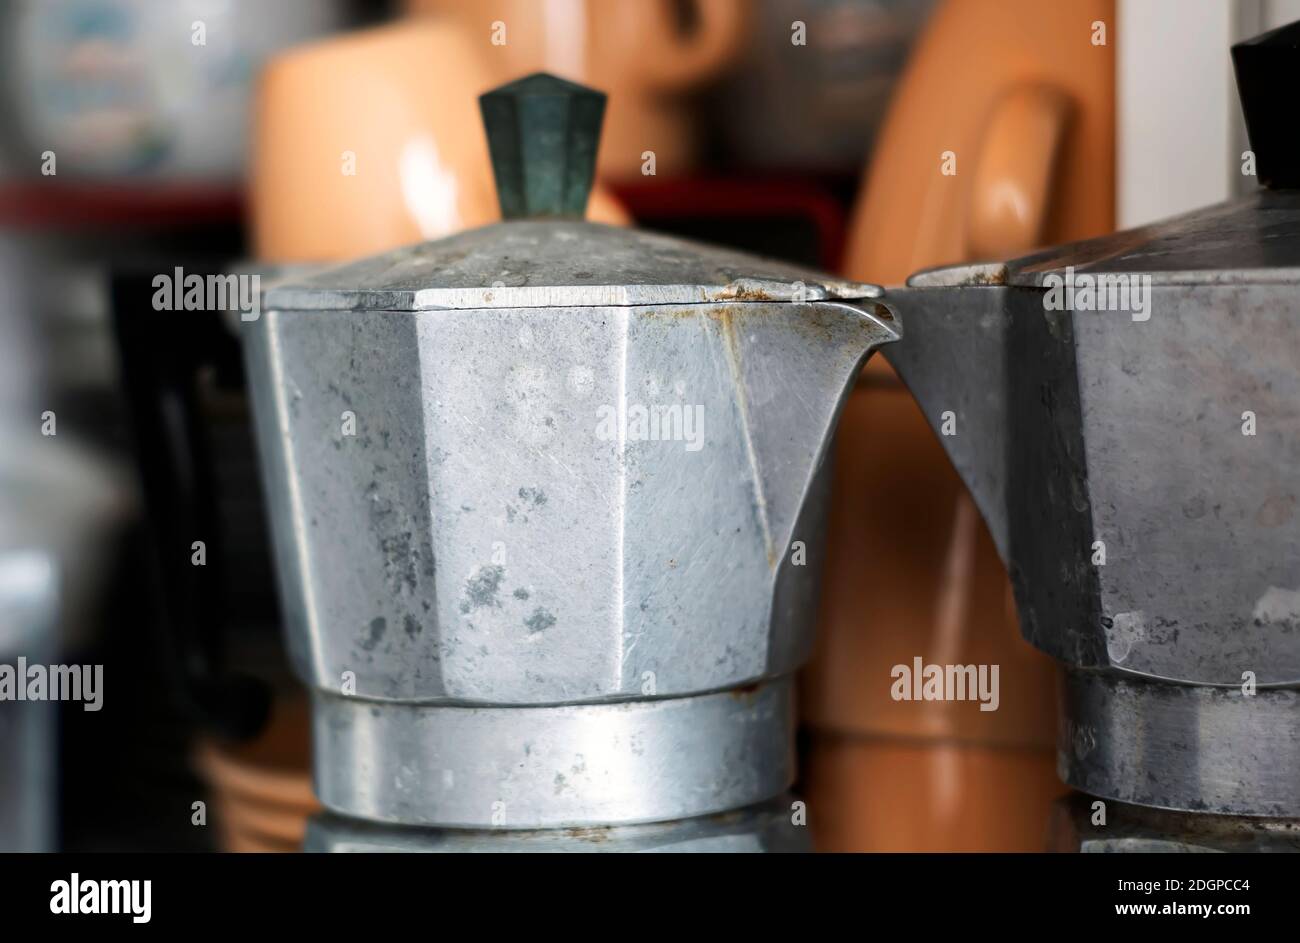 Close-up view of an old rusty coffee pot inside a pantry. Scratches and signs of wear near the spout. Design object. Italian culture Stock Photo